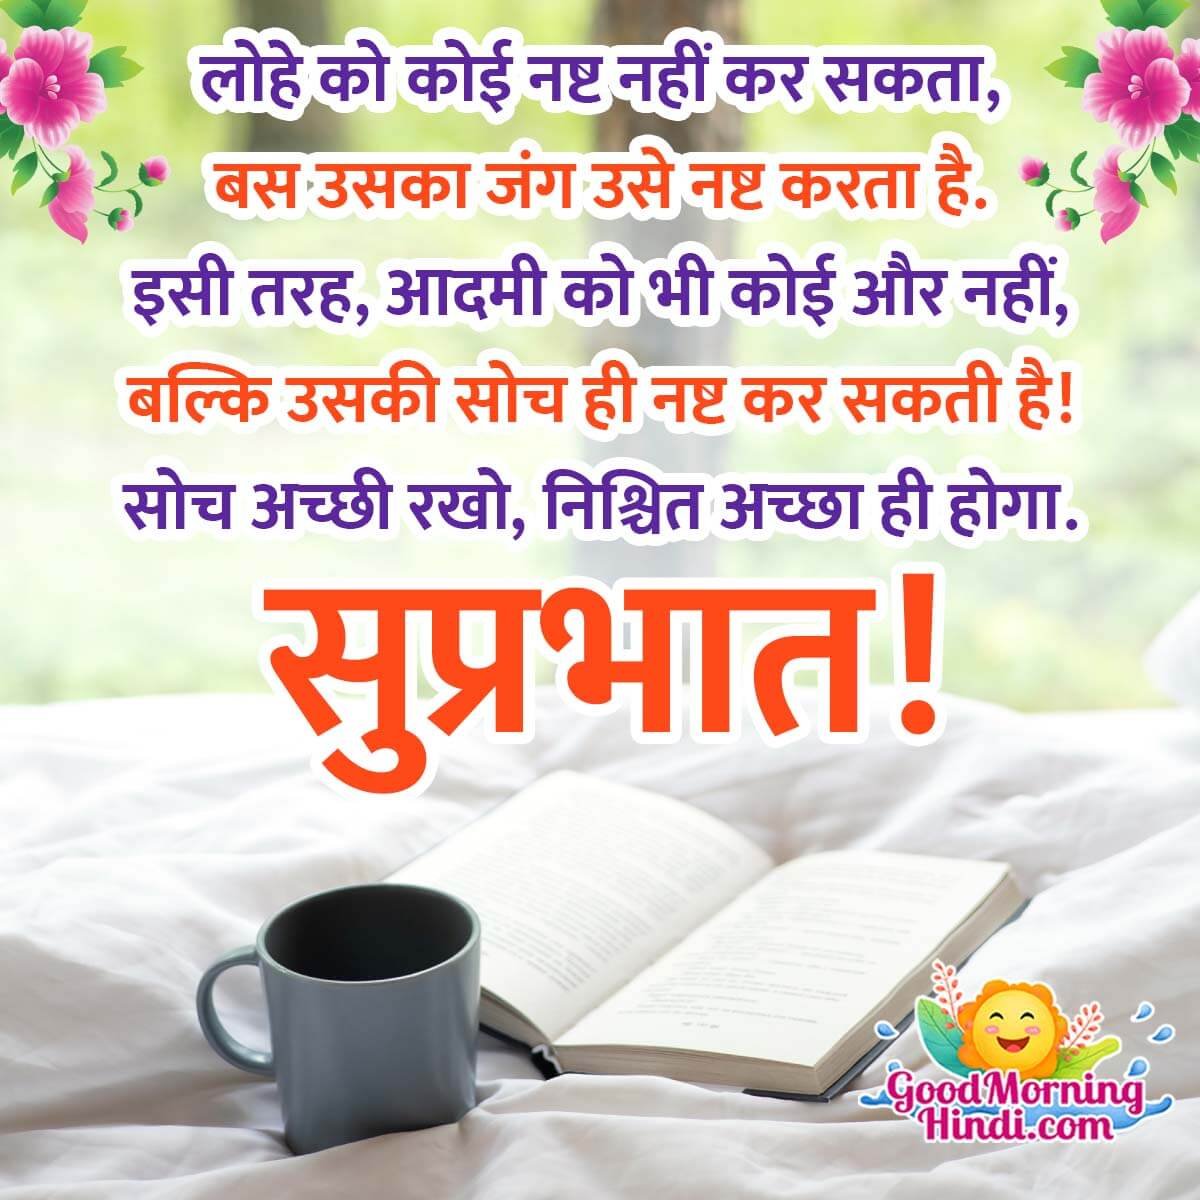 Best Suprabhat Message In Hindi